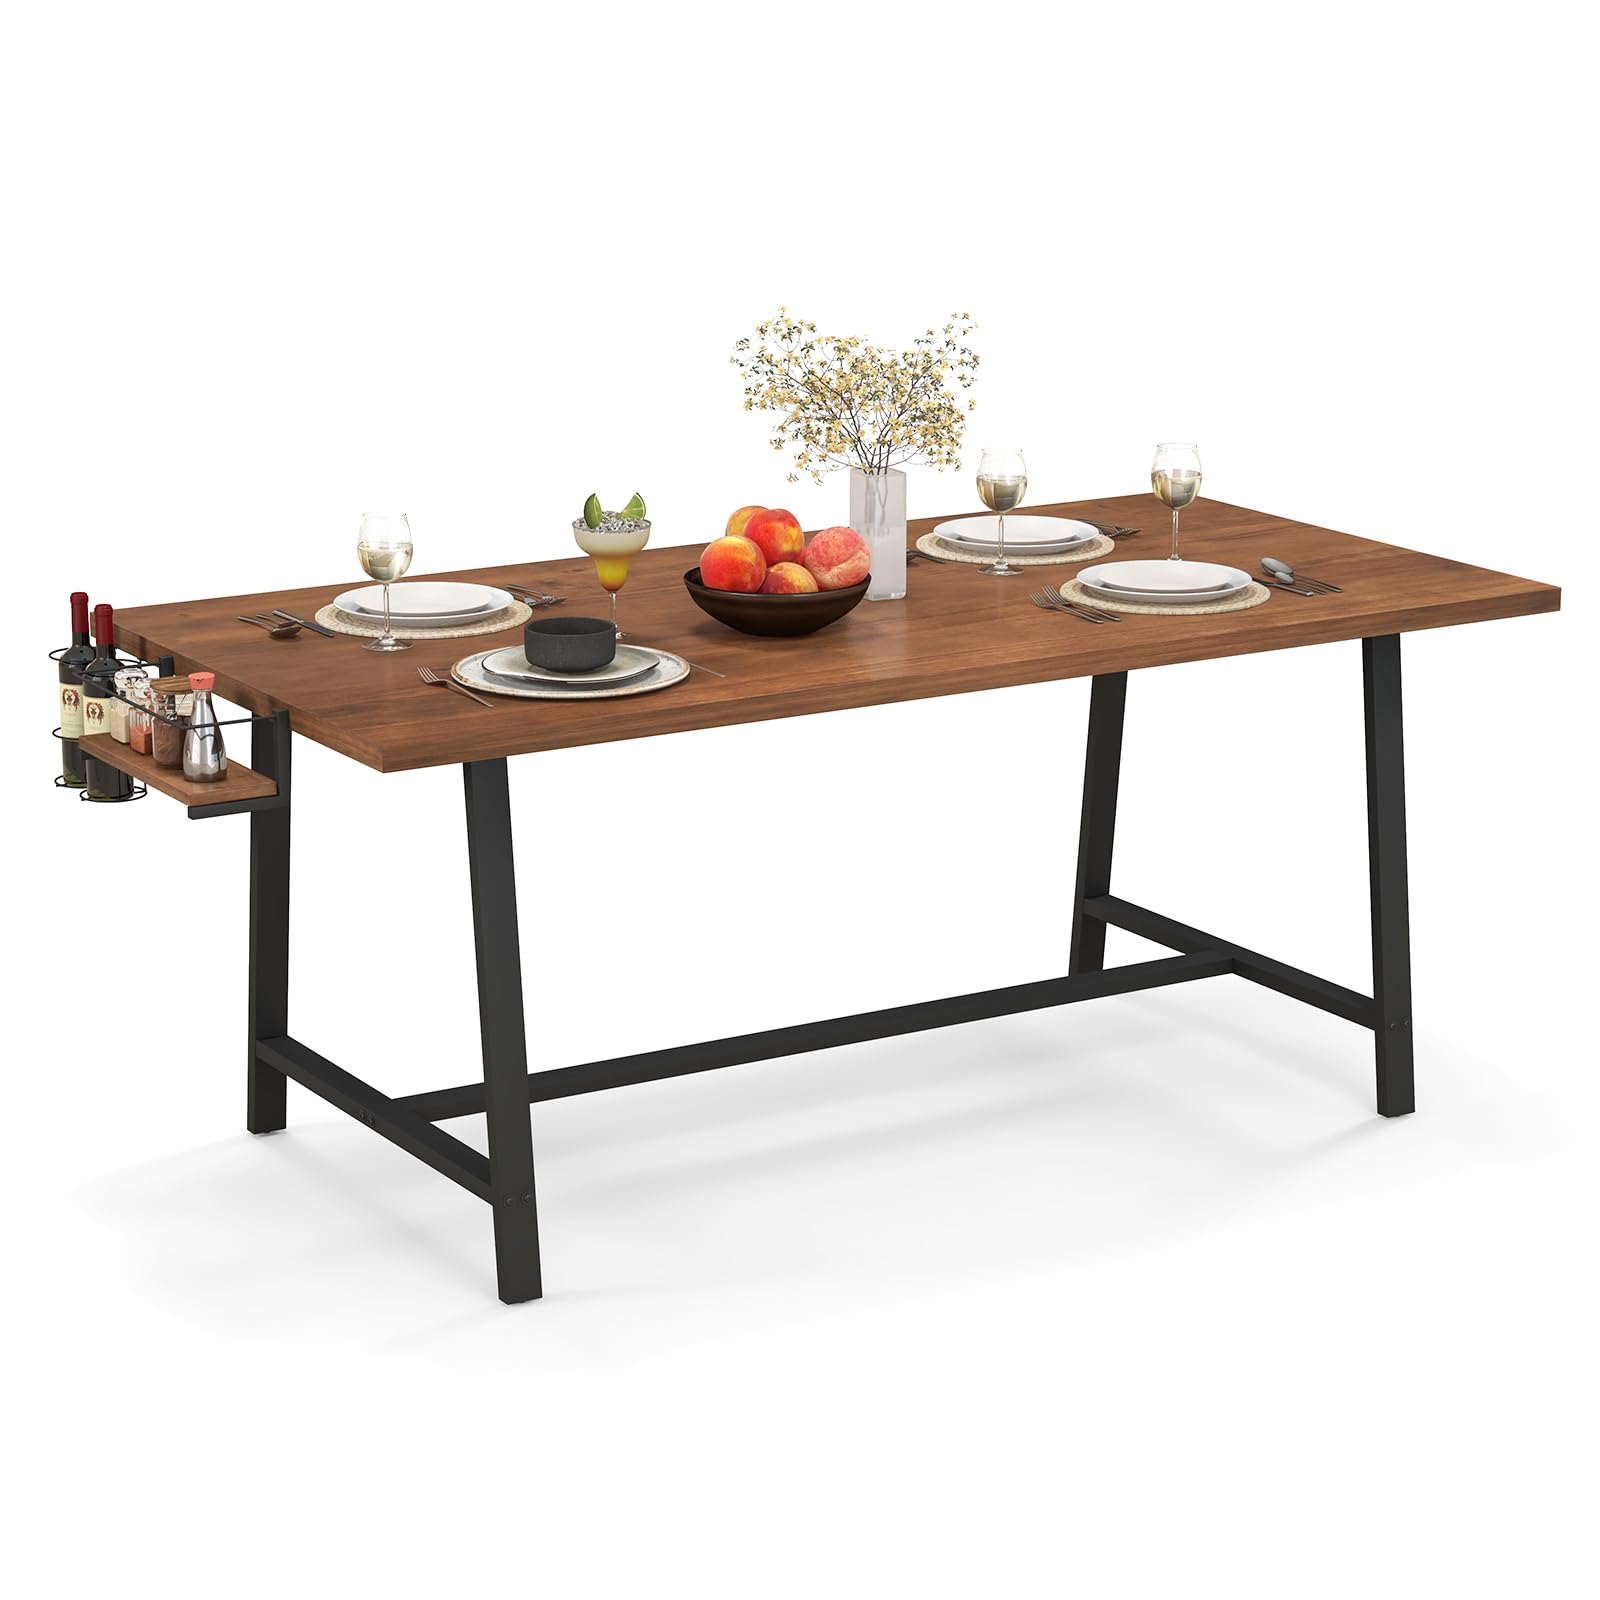 Giantex 72-Inch Dining Table for 5-7, Rectangular Kitchen Table with 2-Bottle Wine Rack